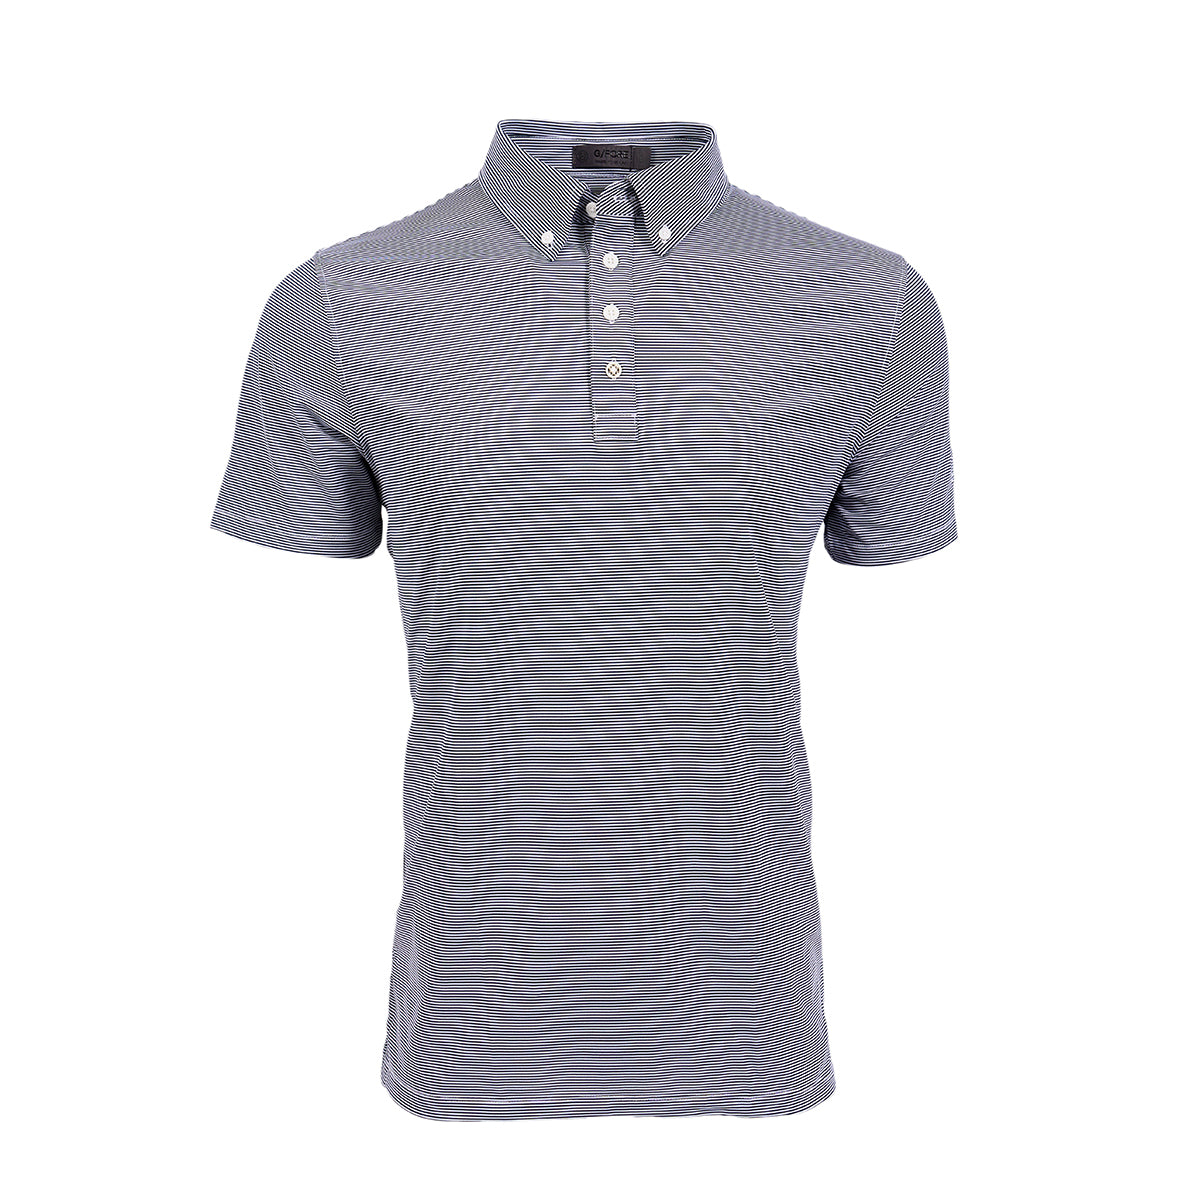 Full product image on a mannequin. Features horizontal stripes in navy and white.  Two buttons on each side of the collar. 4 buttons